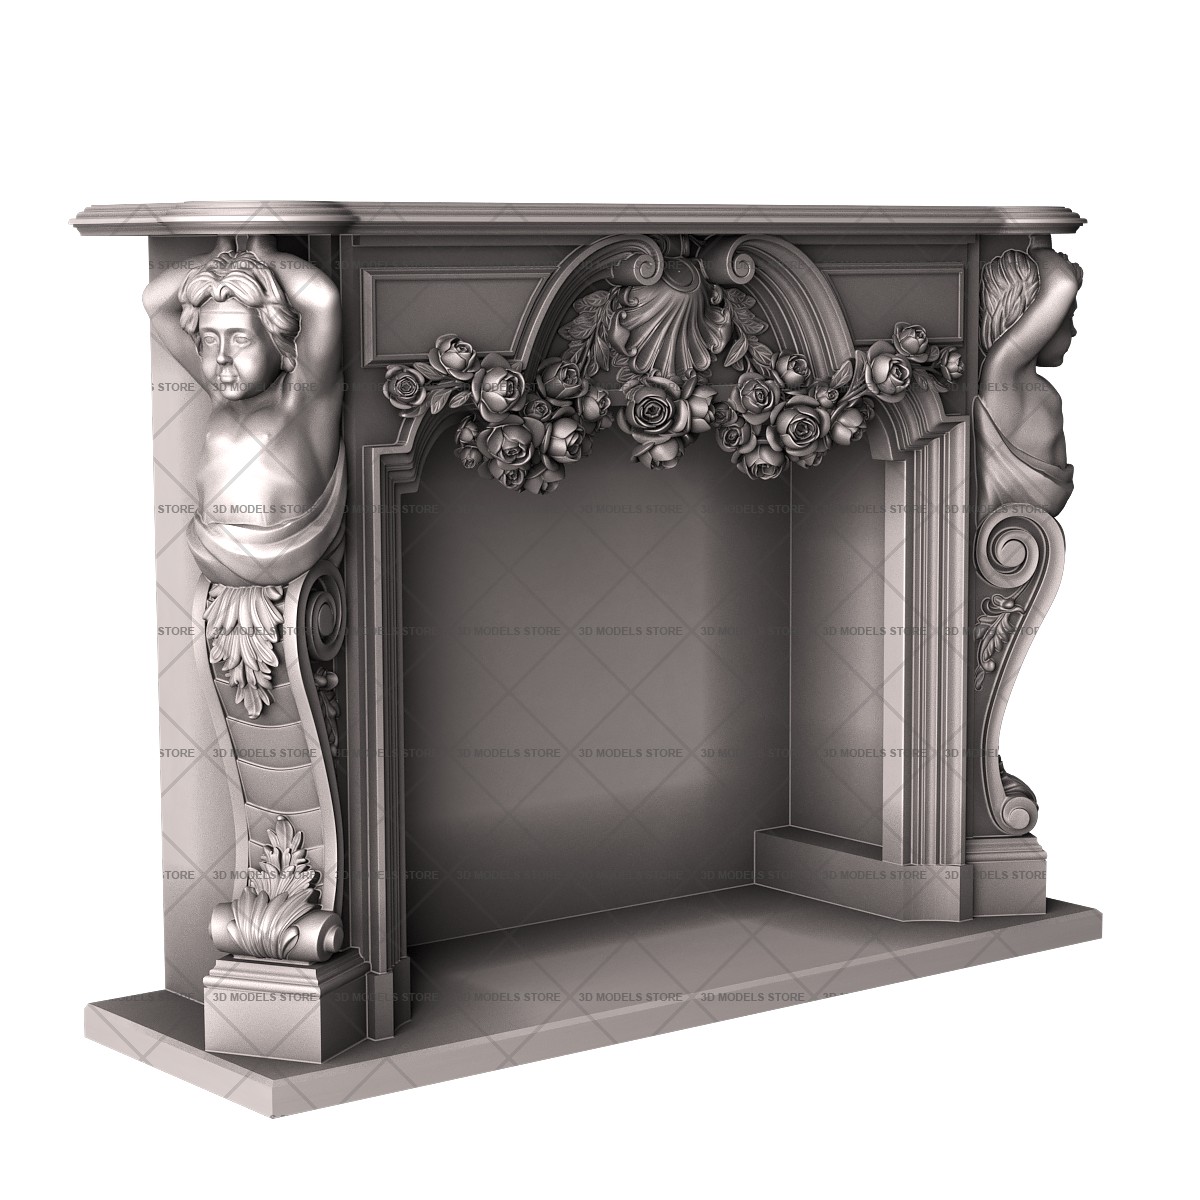 Fireplace with angels, 3d models (stl)